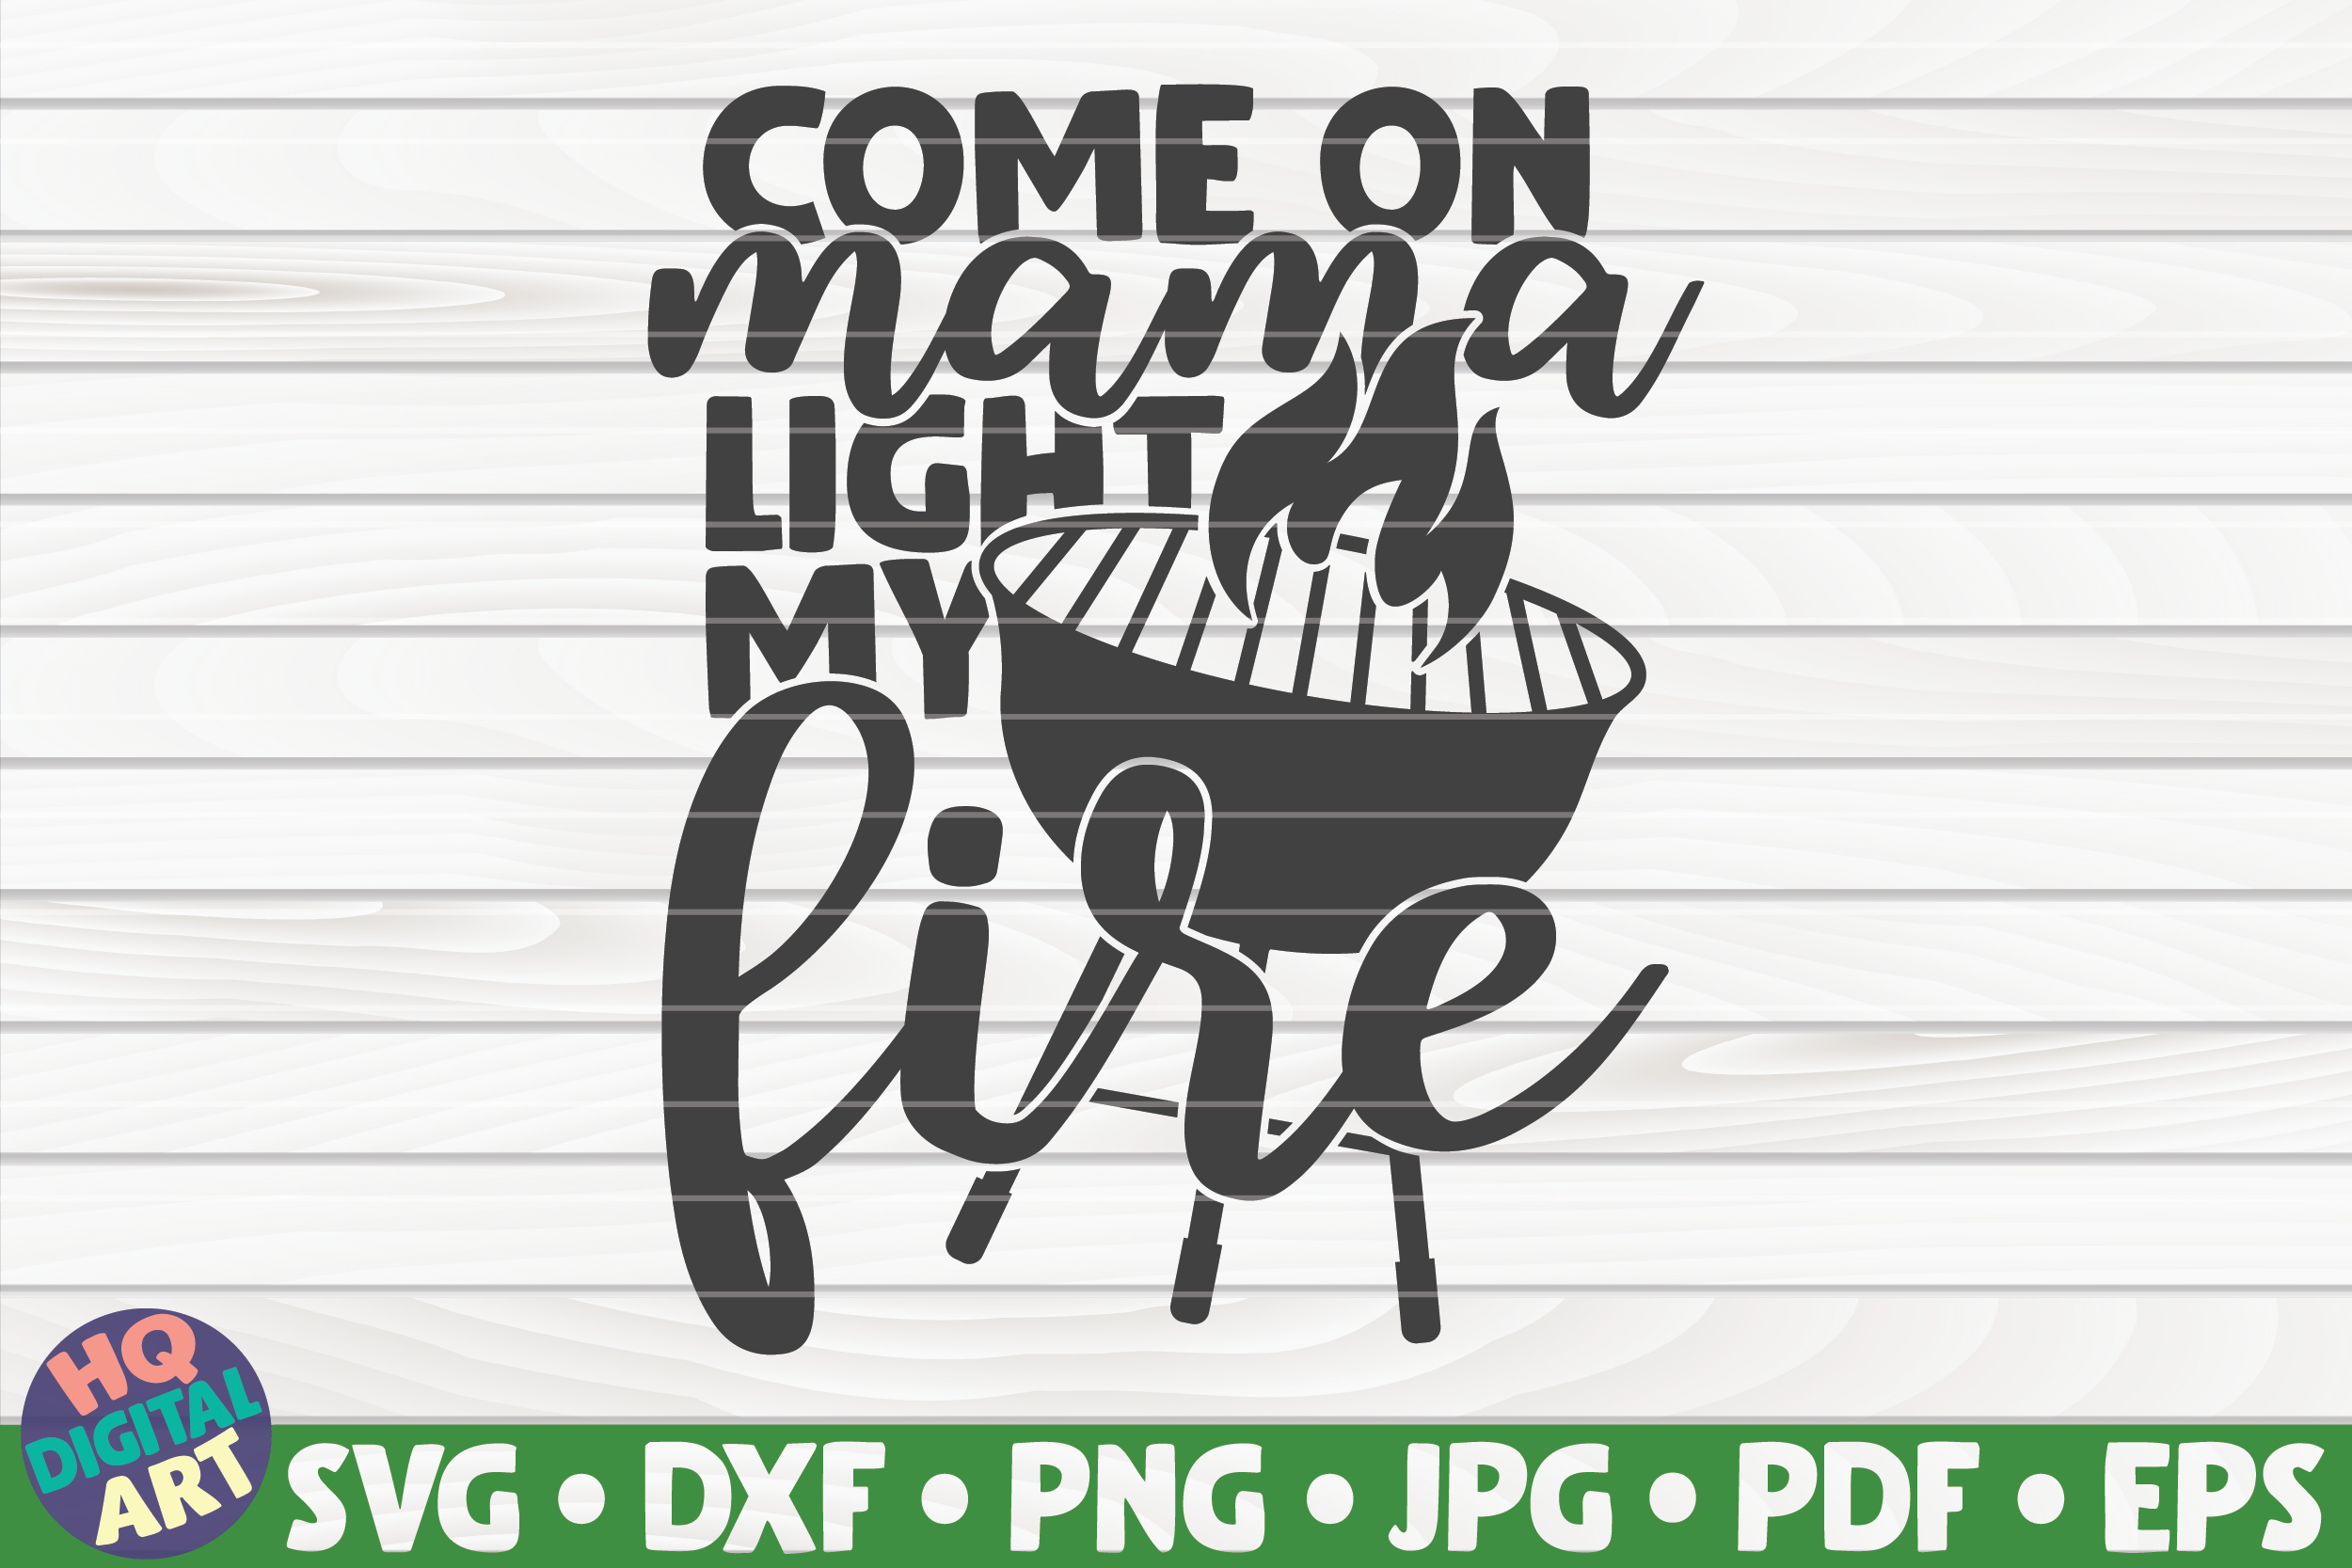 Come On Mama Light My Fire Svg Barbecue Quote By Hqdigitalart Thehungryjpeg Com